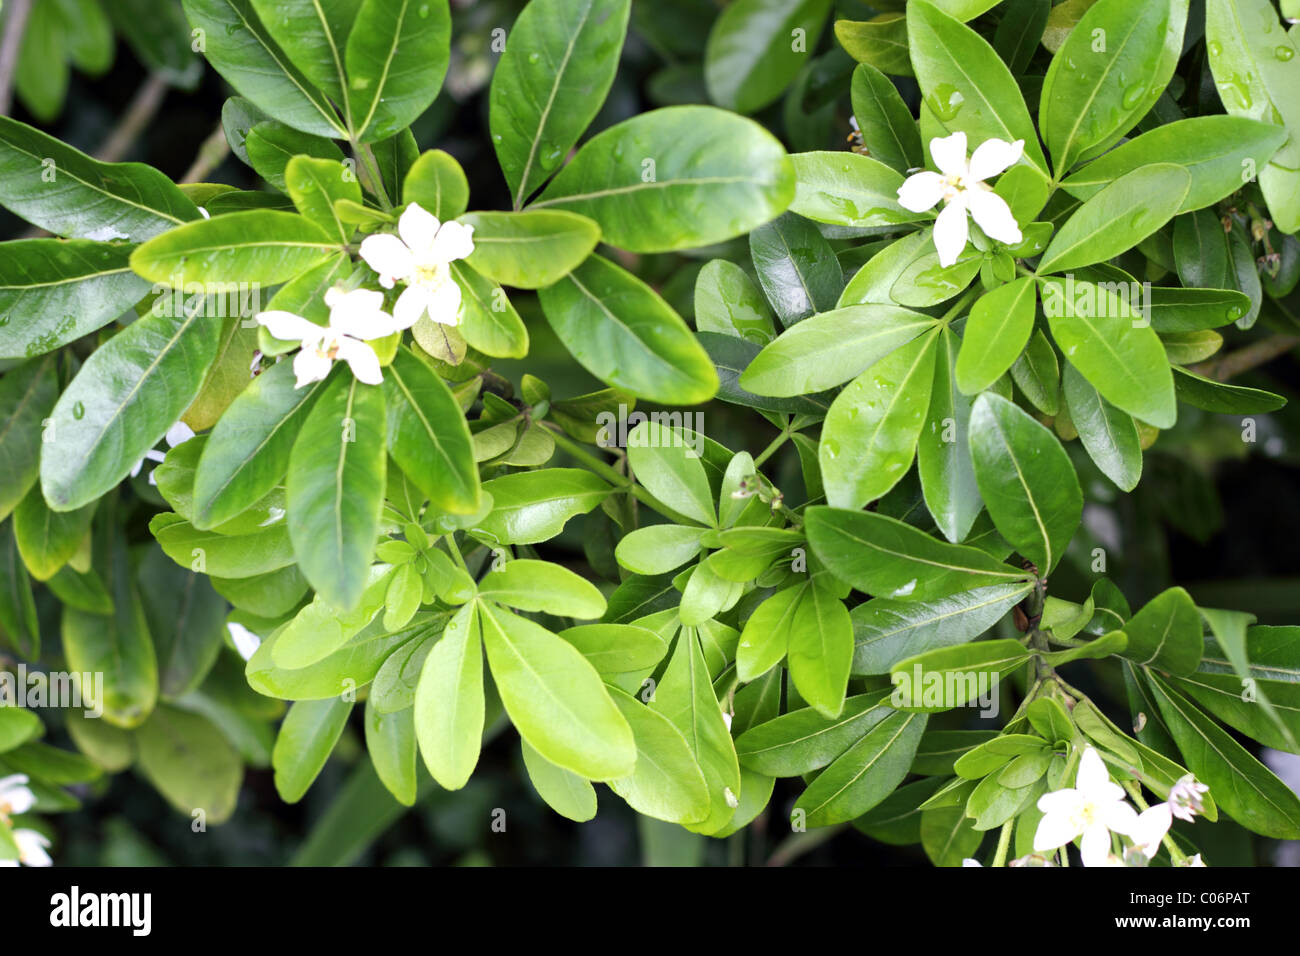 White flowers on a green plant Stock Photo